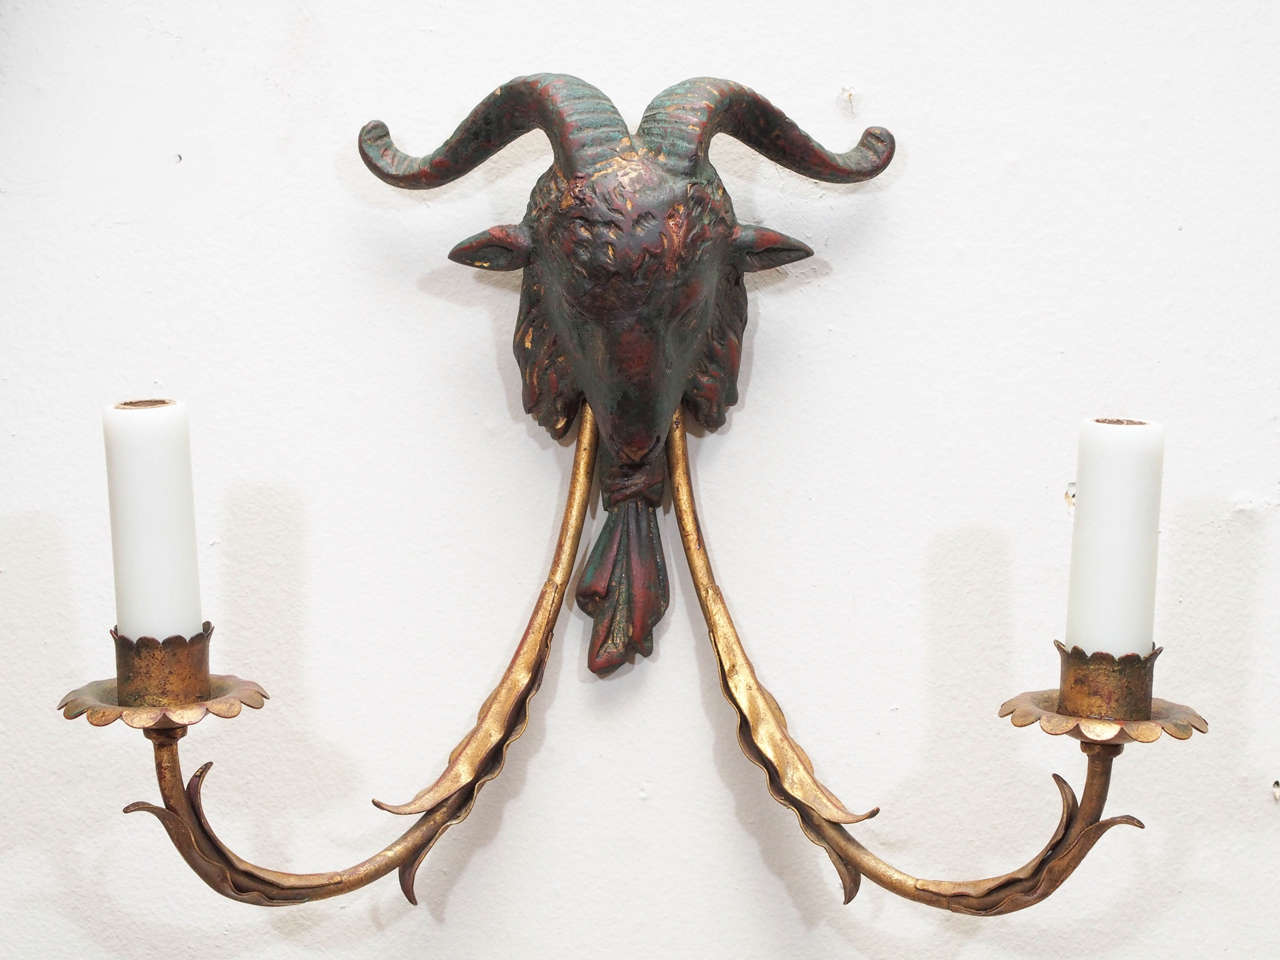 A pair of two-arm wall lights, the arms, sheathed with sinuous leaves, supported by a ram's head. Heads of resin. Produced by Palladio, the Palladio sticker dated 